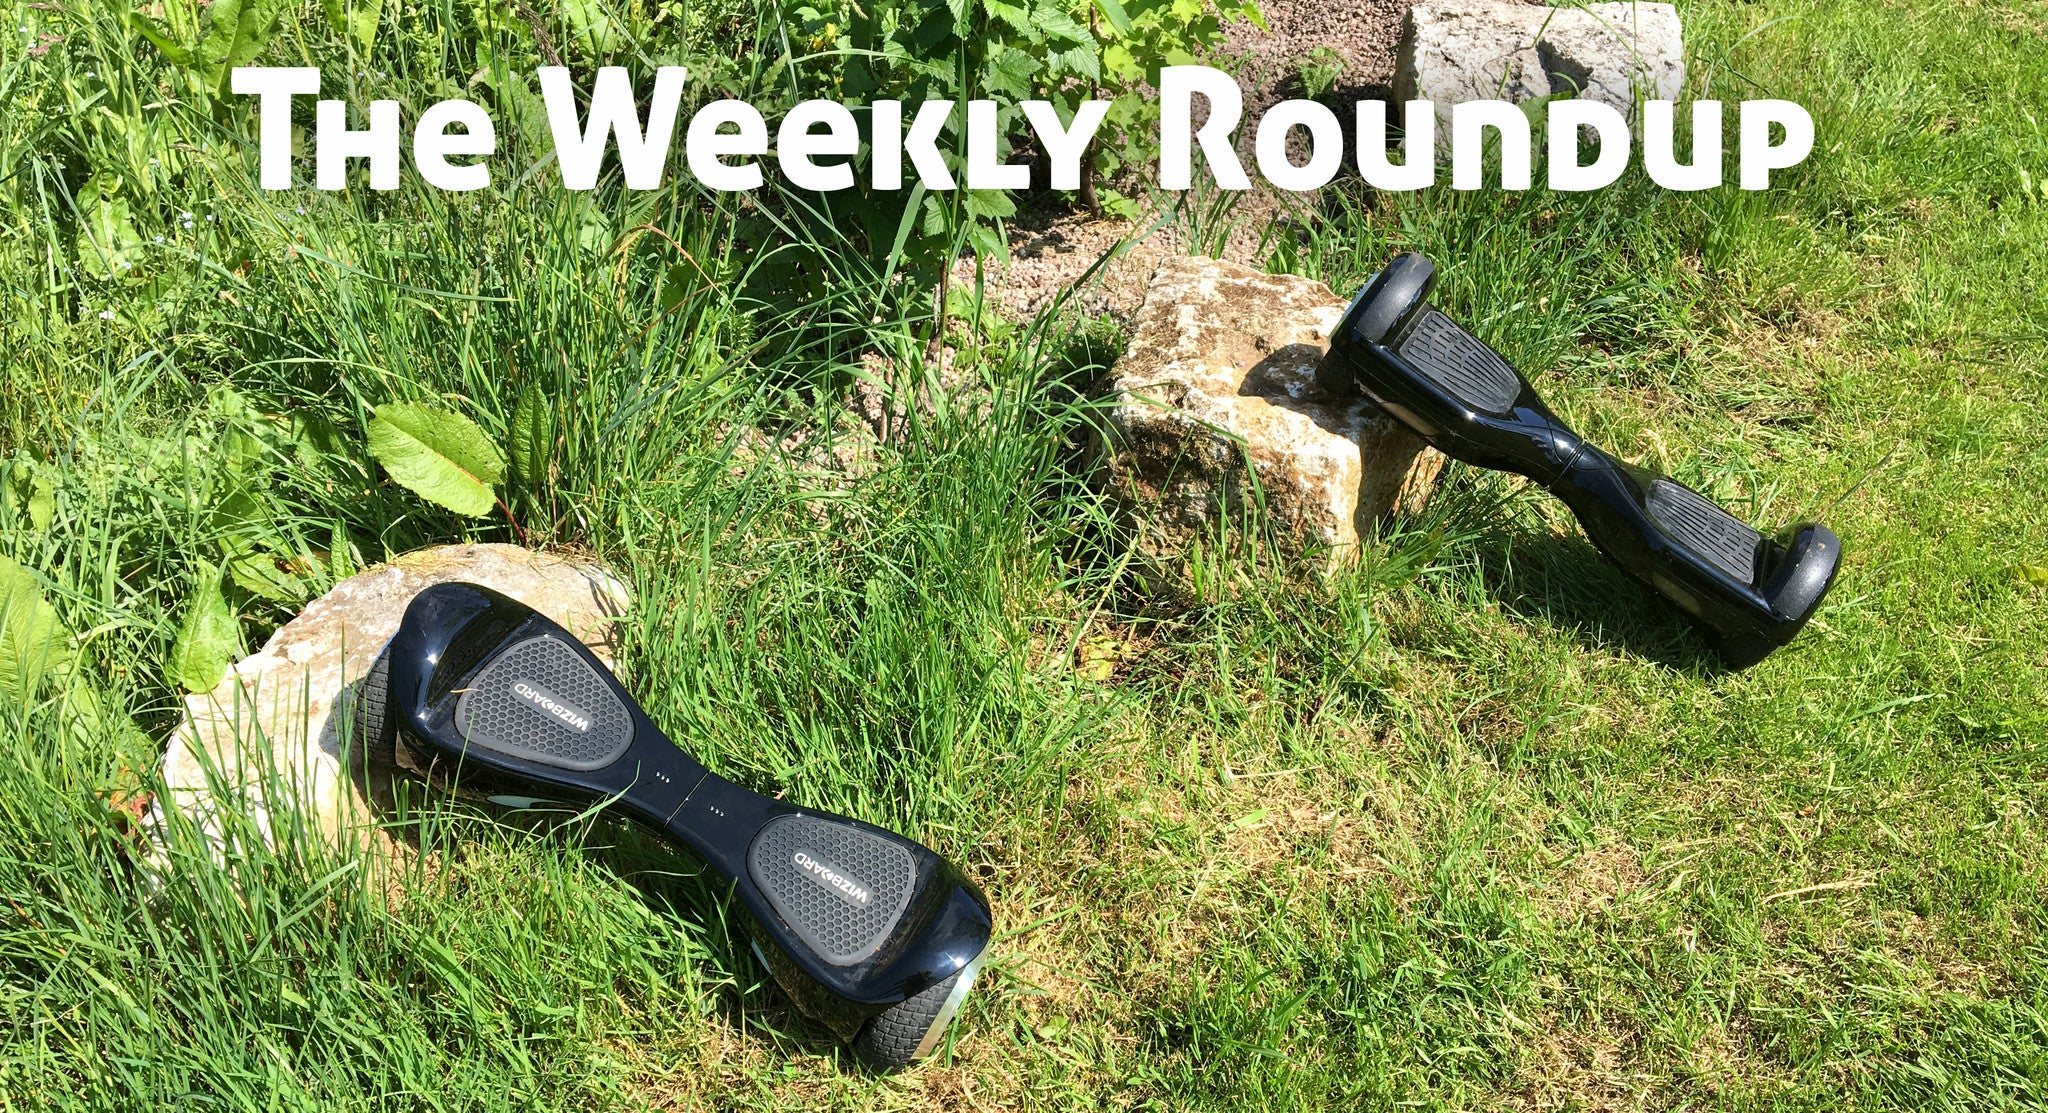 The Weekly Roundup